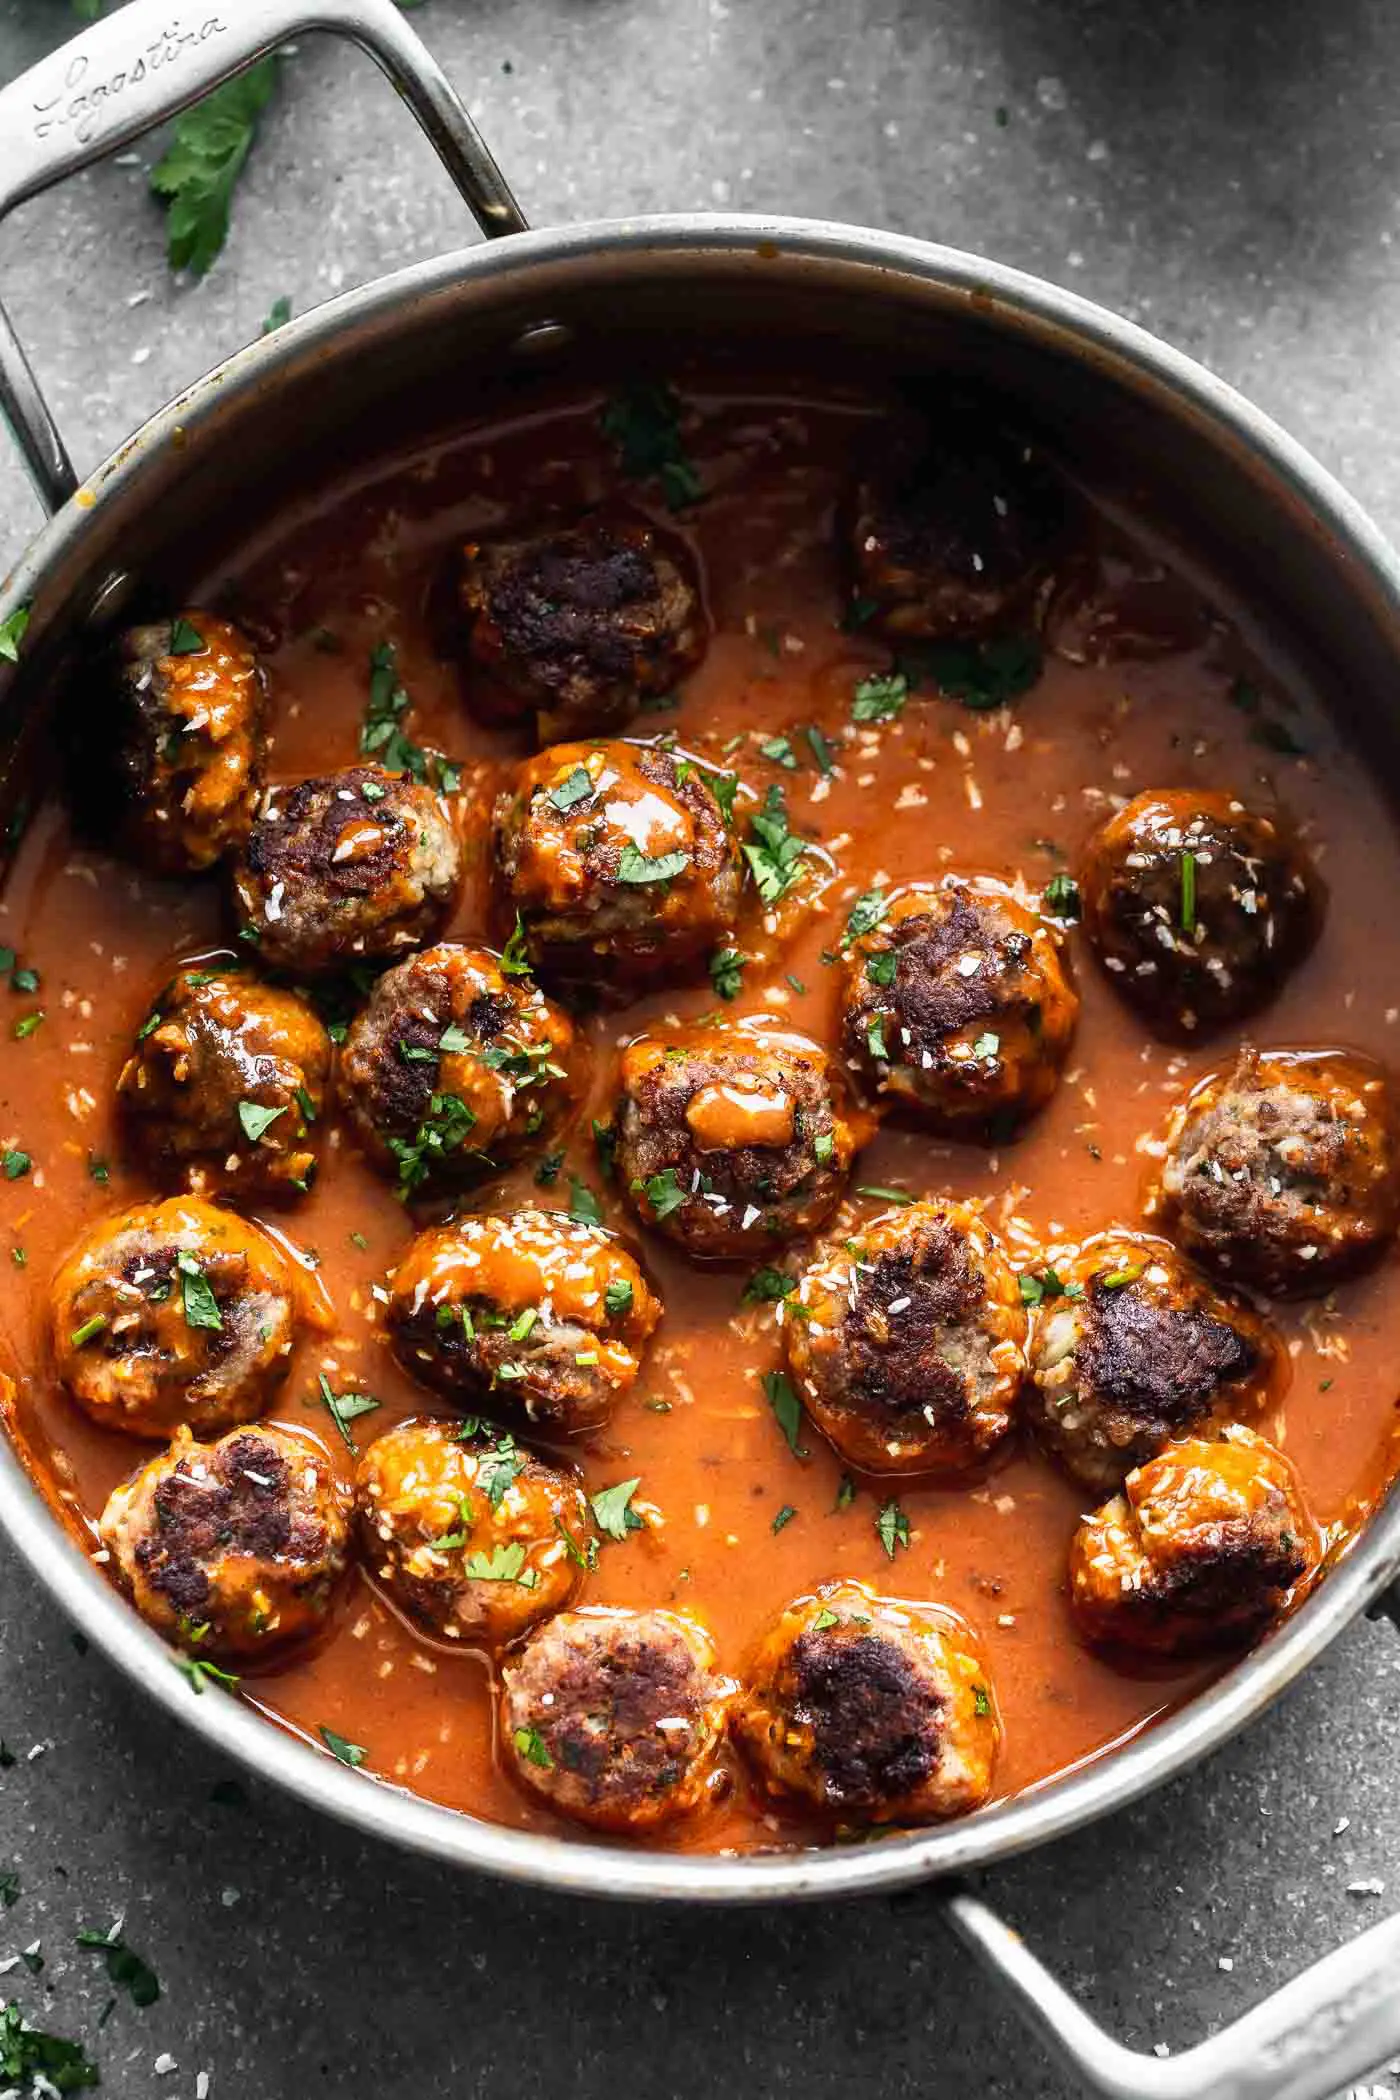 These Coconut Curry Meatballs require minimal ingredients, but have SO much flavor. They're packed with garlic, ginger, onion and cilantro, browned until crisp, and bathed in a luscious coconut curry sauce. Only 30 minutes from start to finish! 